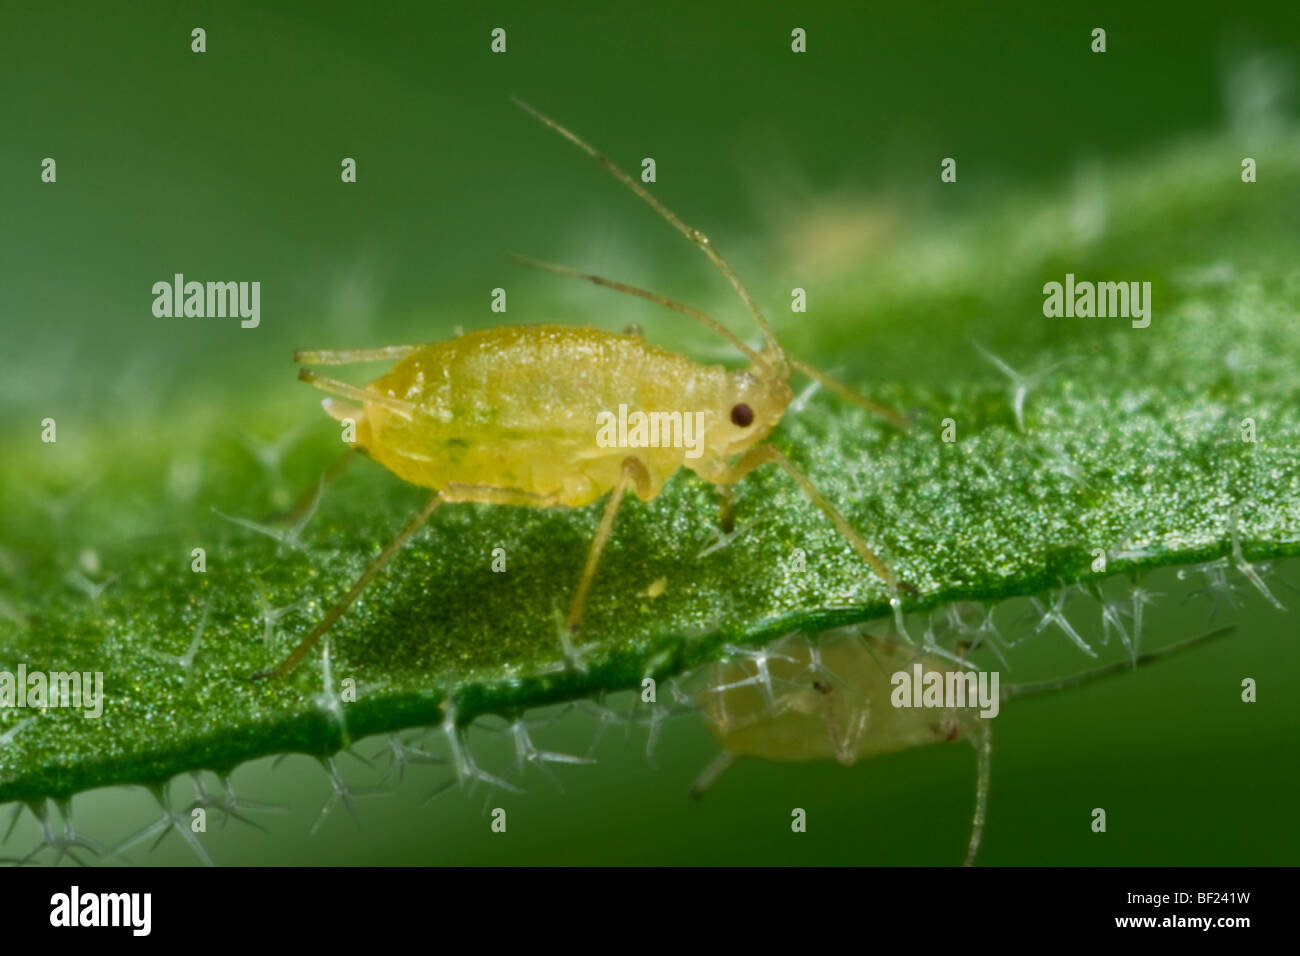 Agriculture - Green peach aphid adult (Myzus persicae) on a leaf, side view / California, USA. Stock Photo